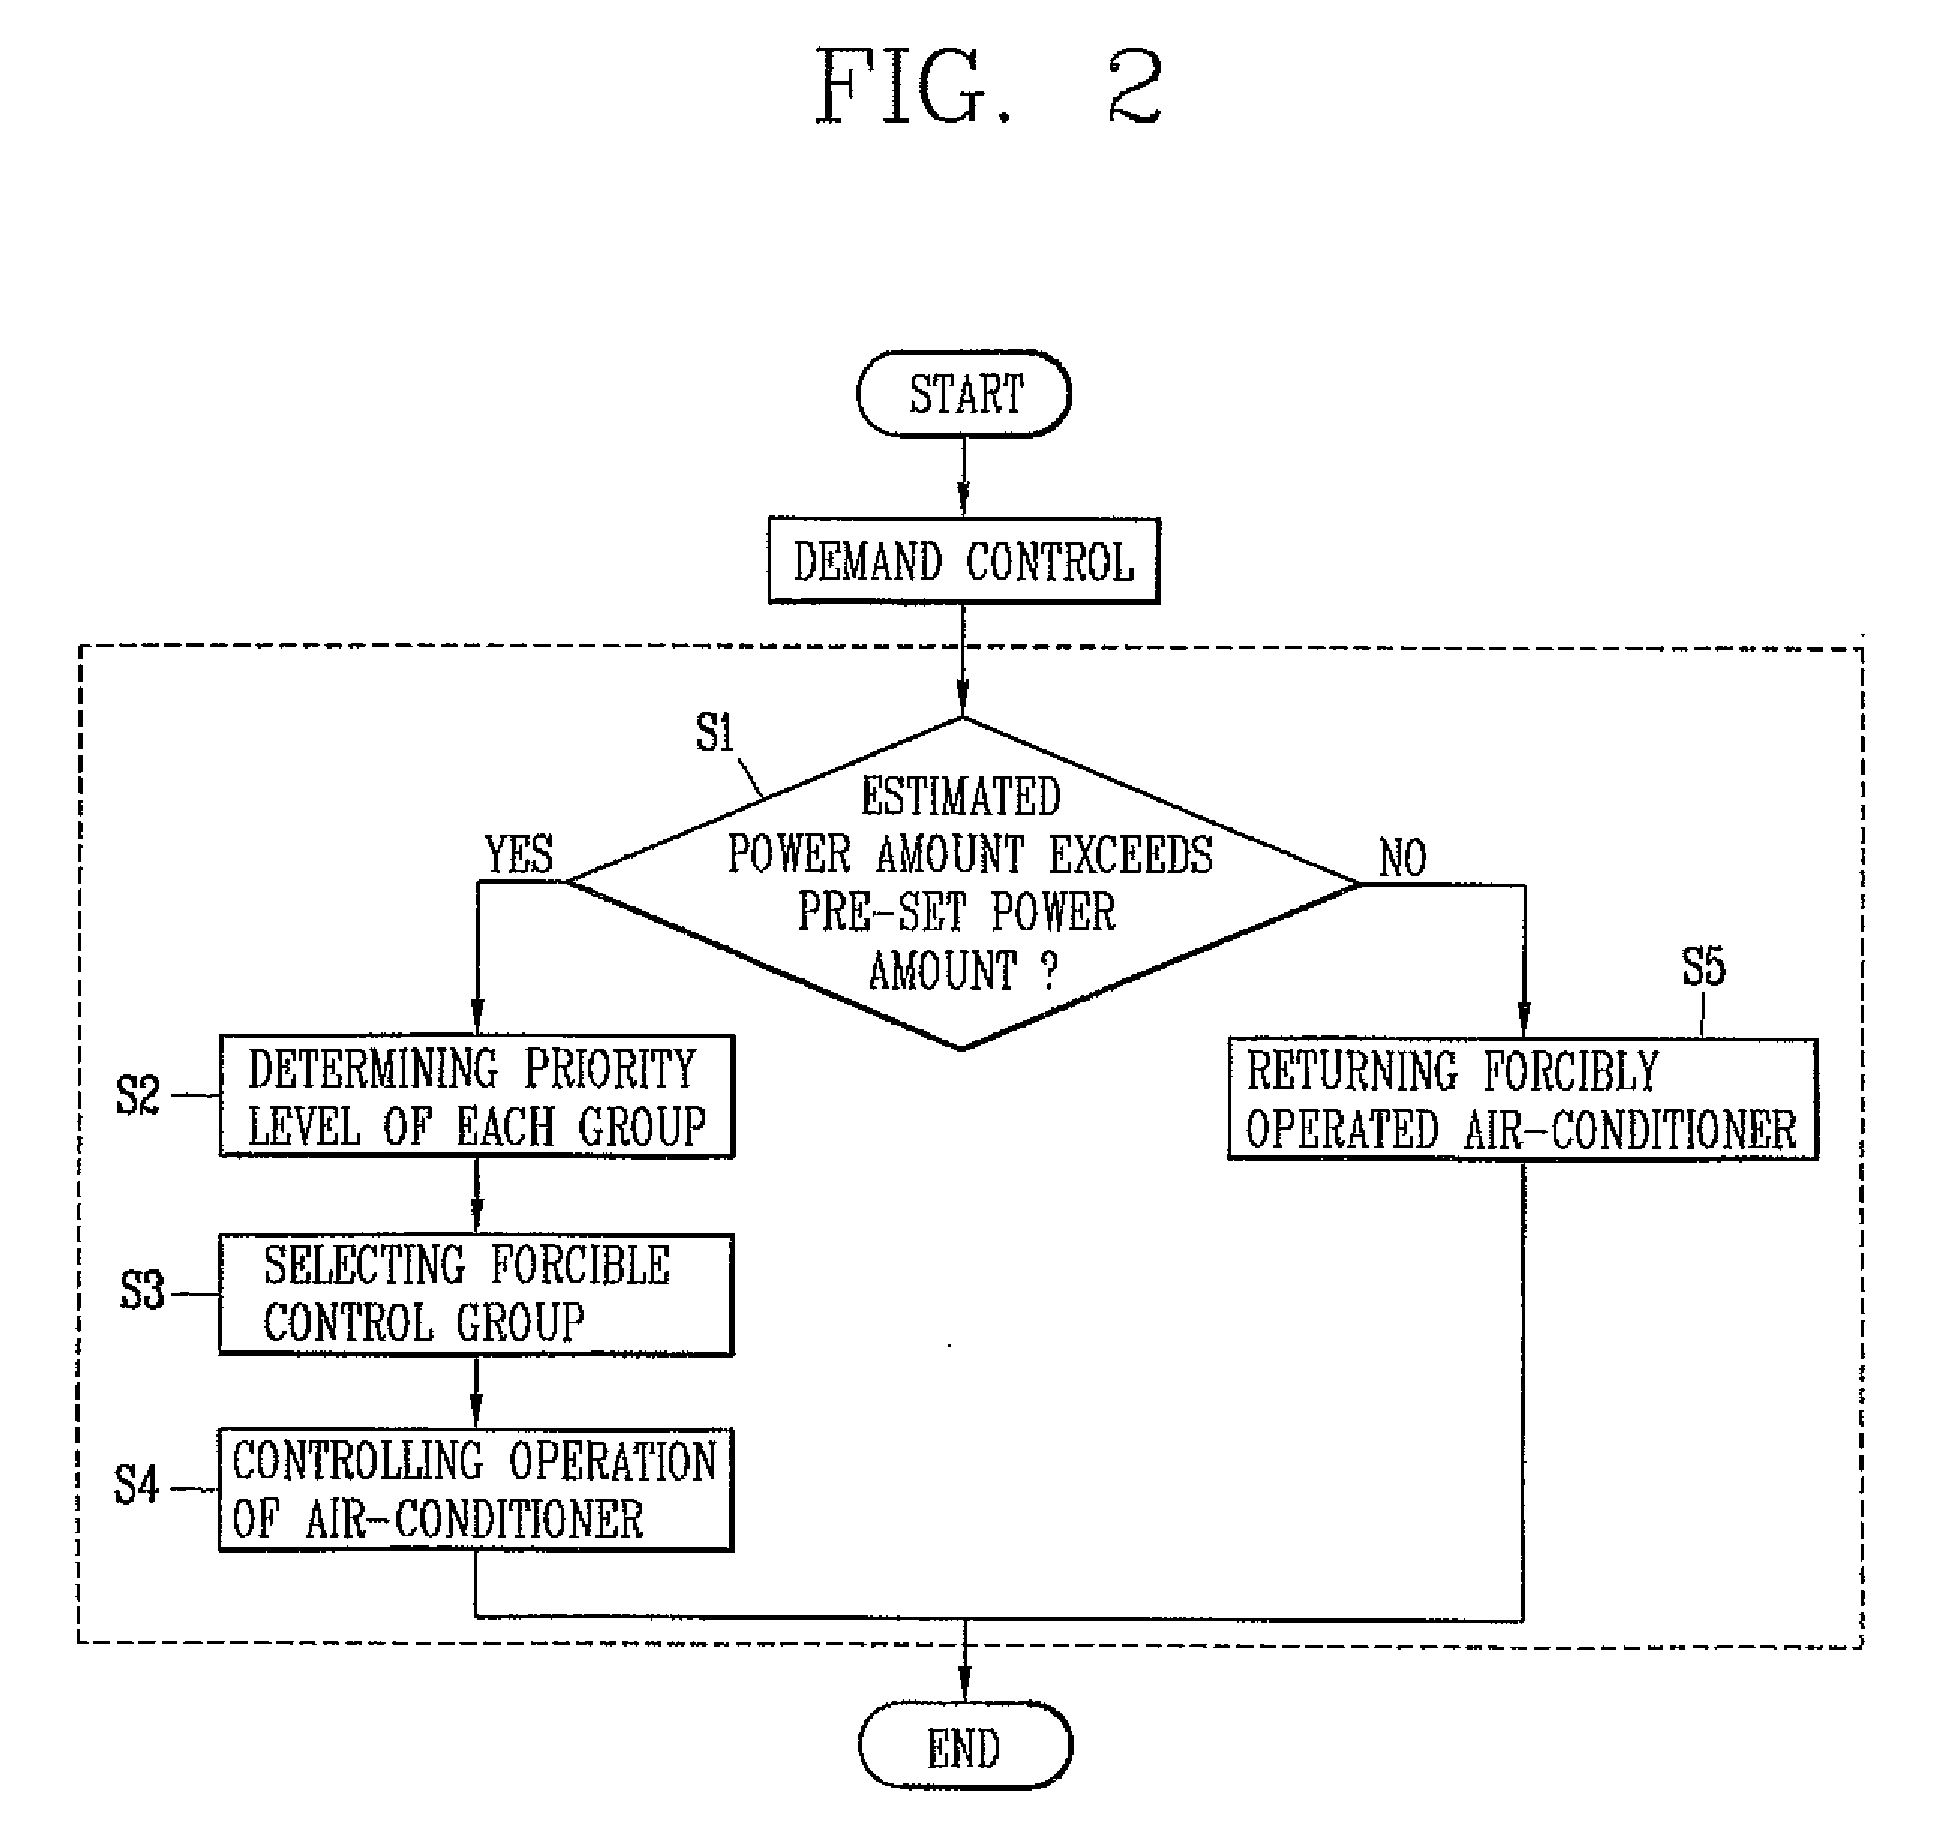 System and method for controlling demand of multi-air-conditioner